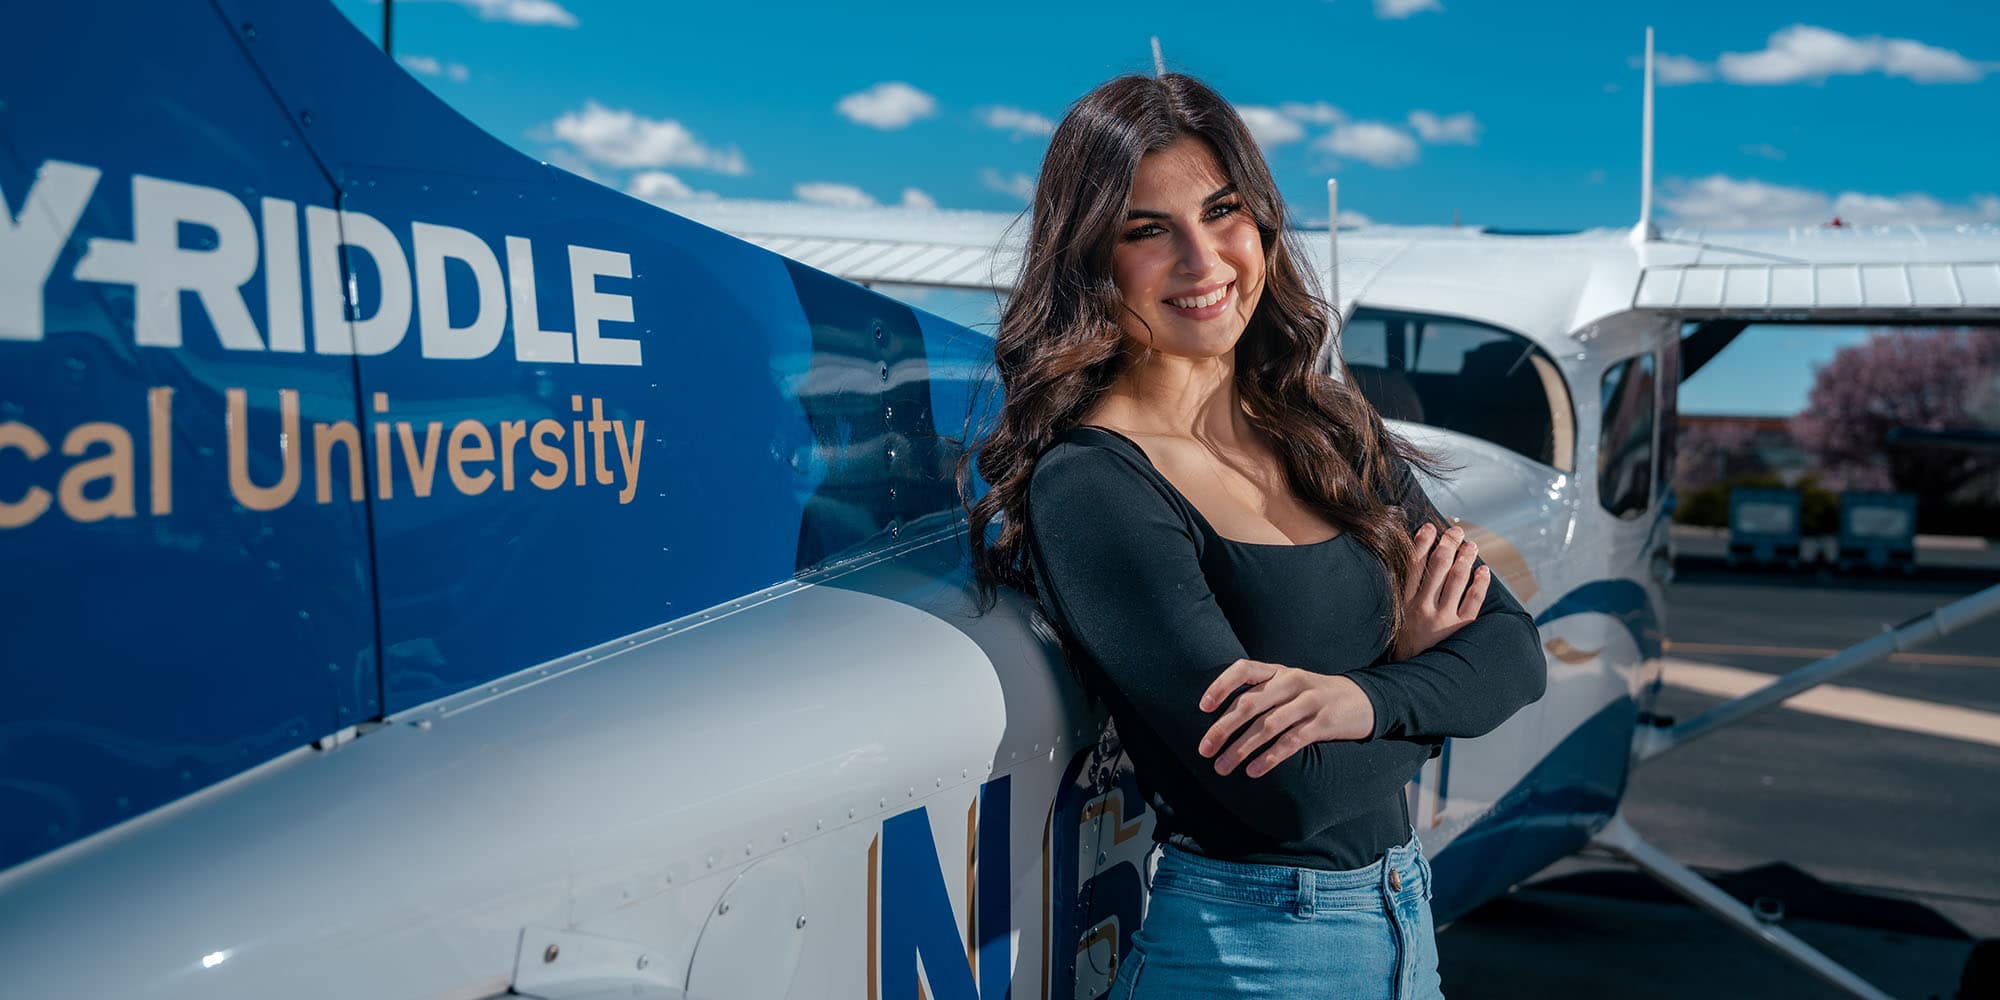 For student pilot Serena Fechter, the flight line at Embry-Riddle is one of her happy places.